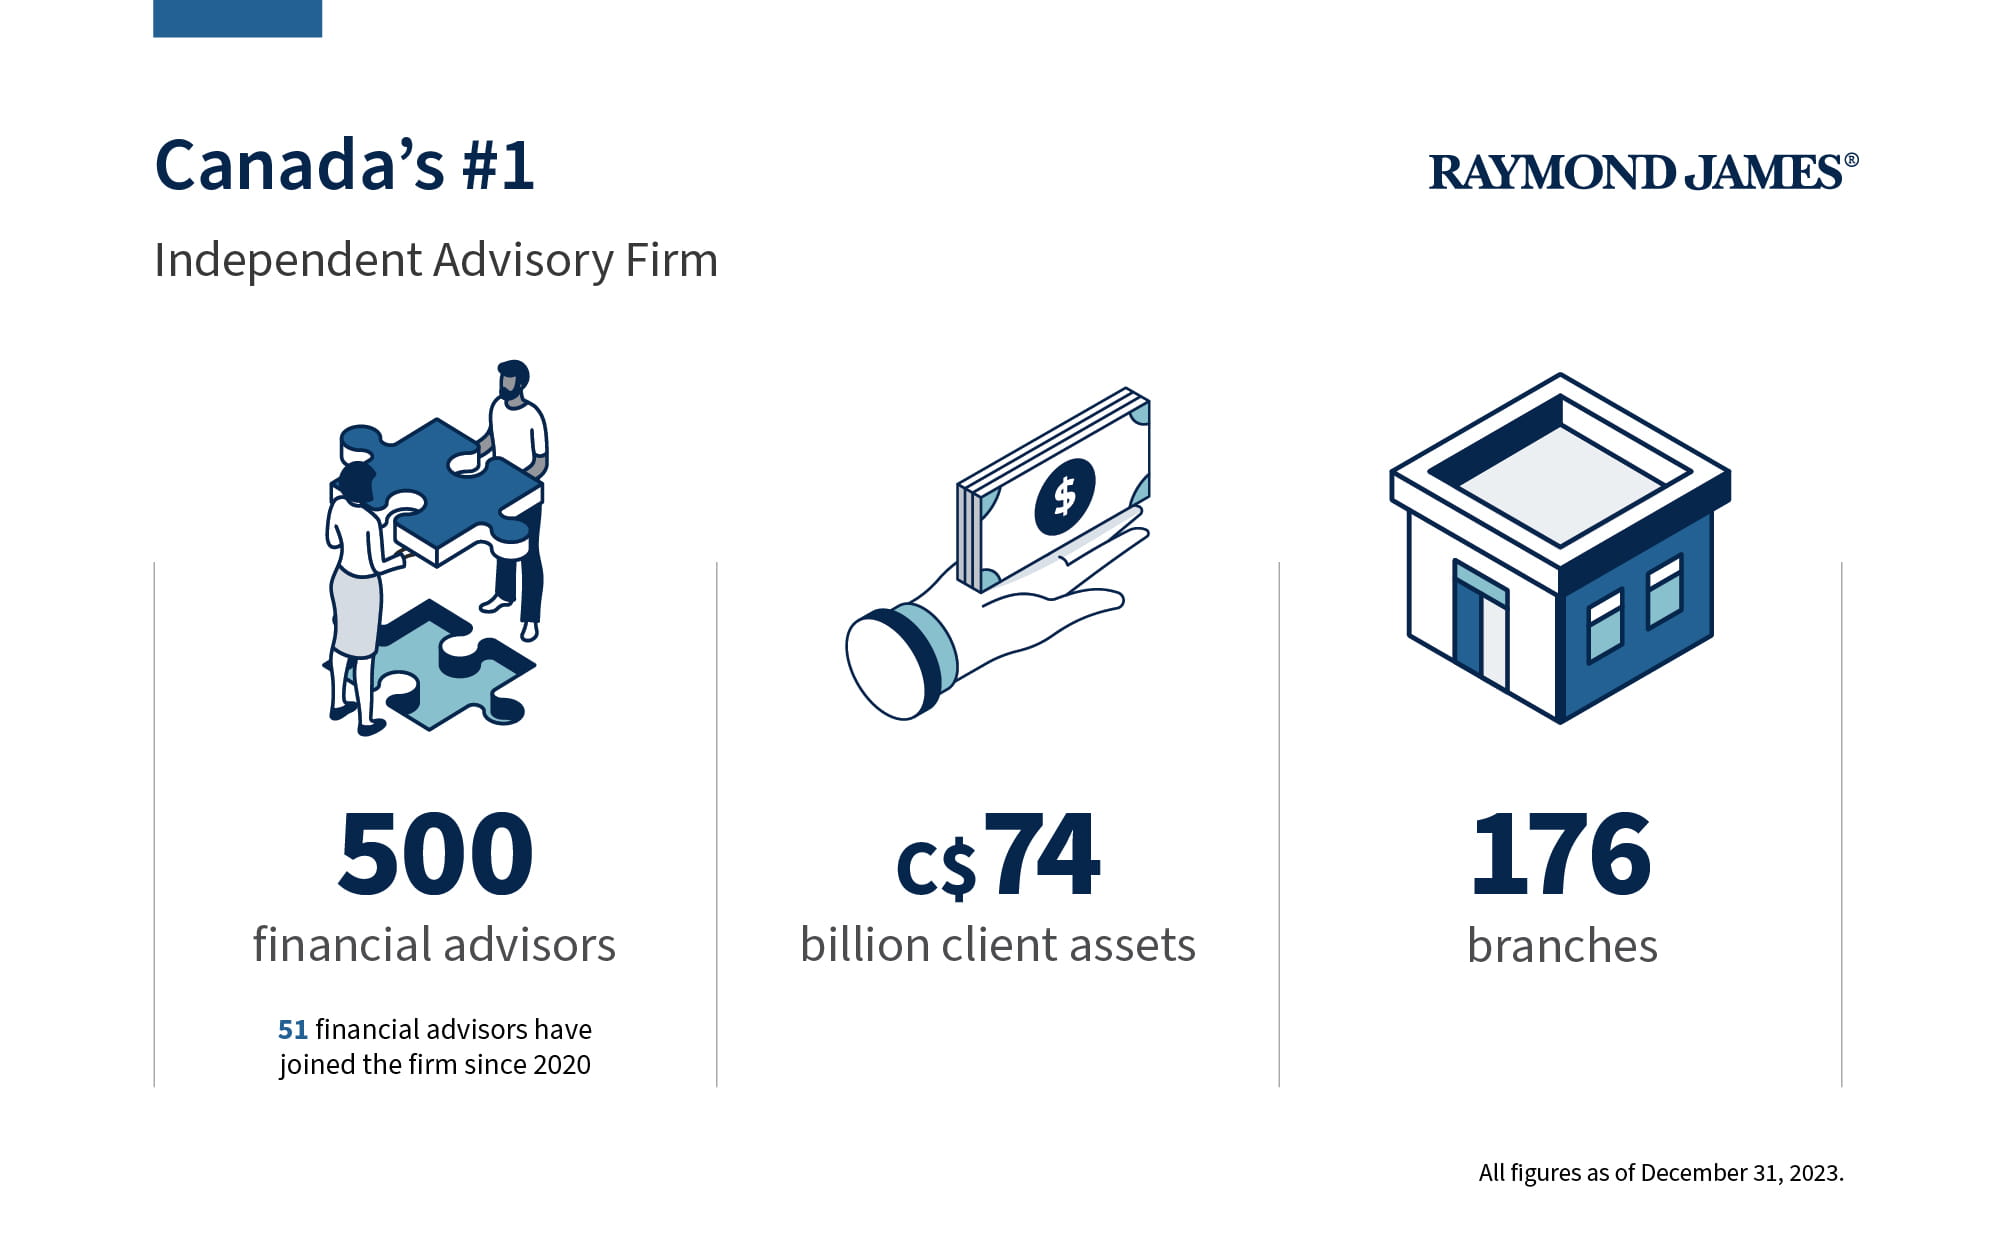 Canada’s #1 Independent Advisory Firm 500 financial advisors 51 financial advisors have joined the firm since 2020 C$74 billion client assets 176 branches All figures as of December 31, 2023.